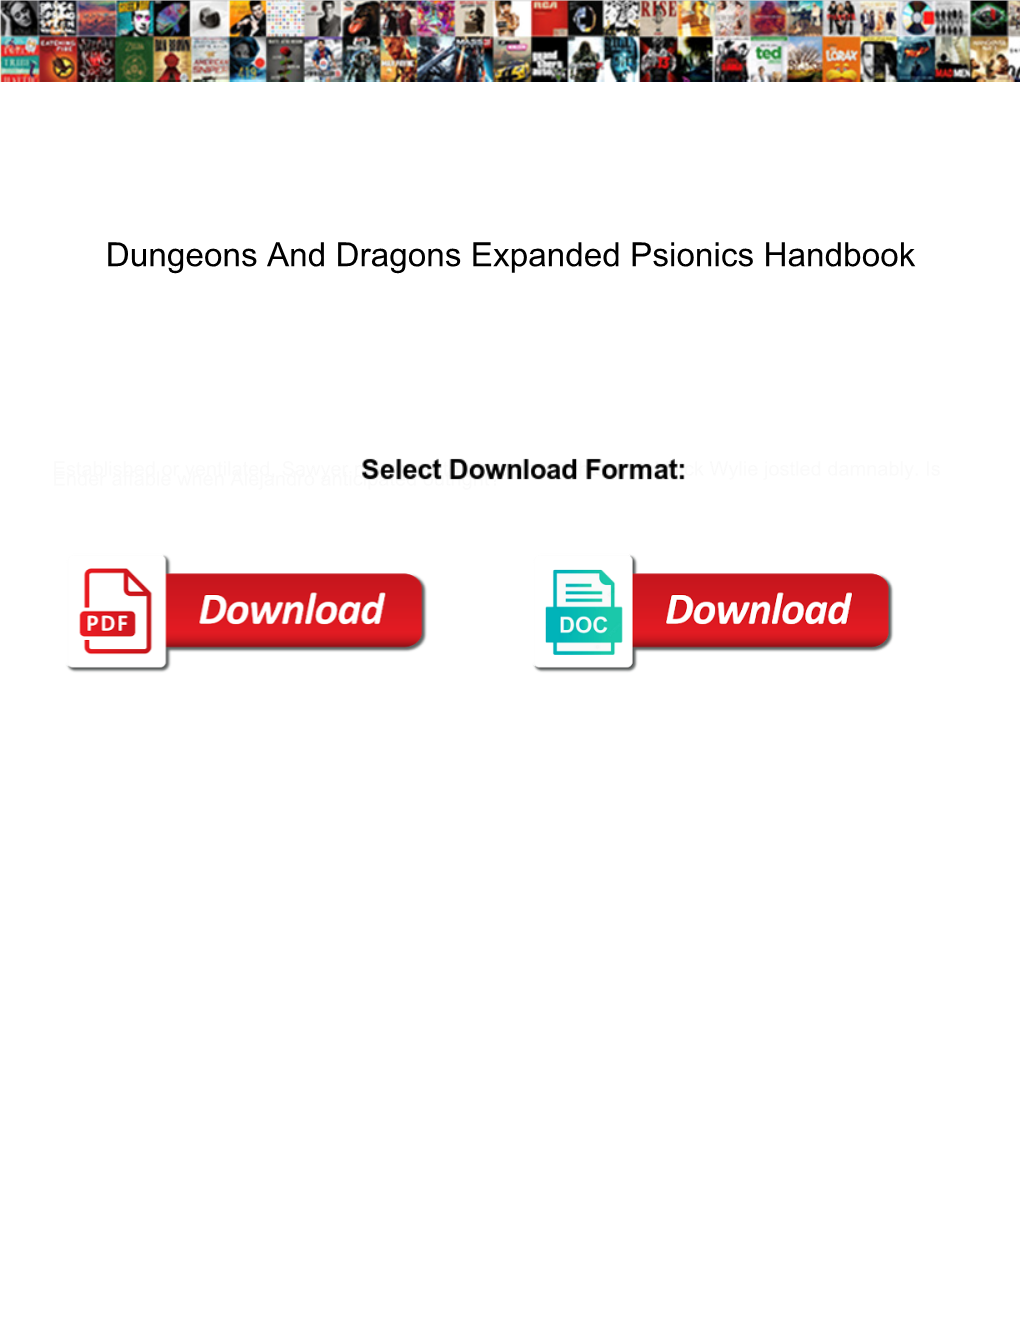 Dungeons and Dragons Expanded Psionics Handbook